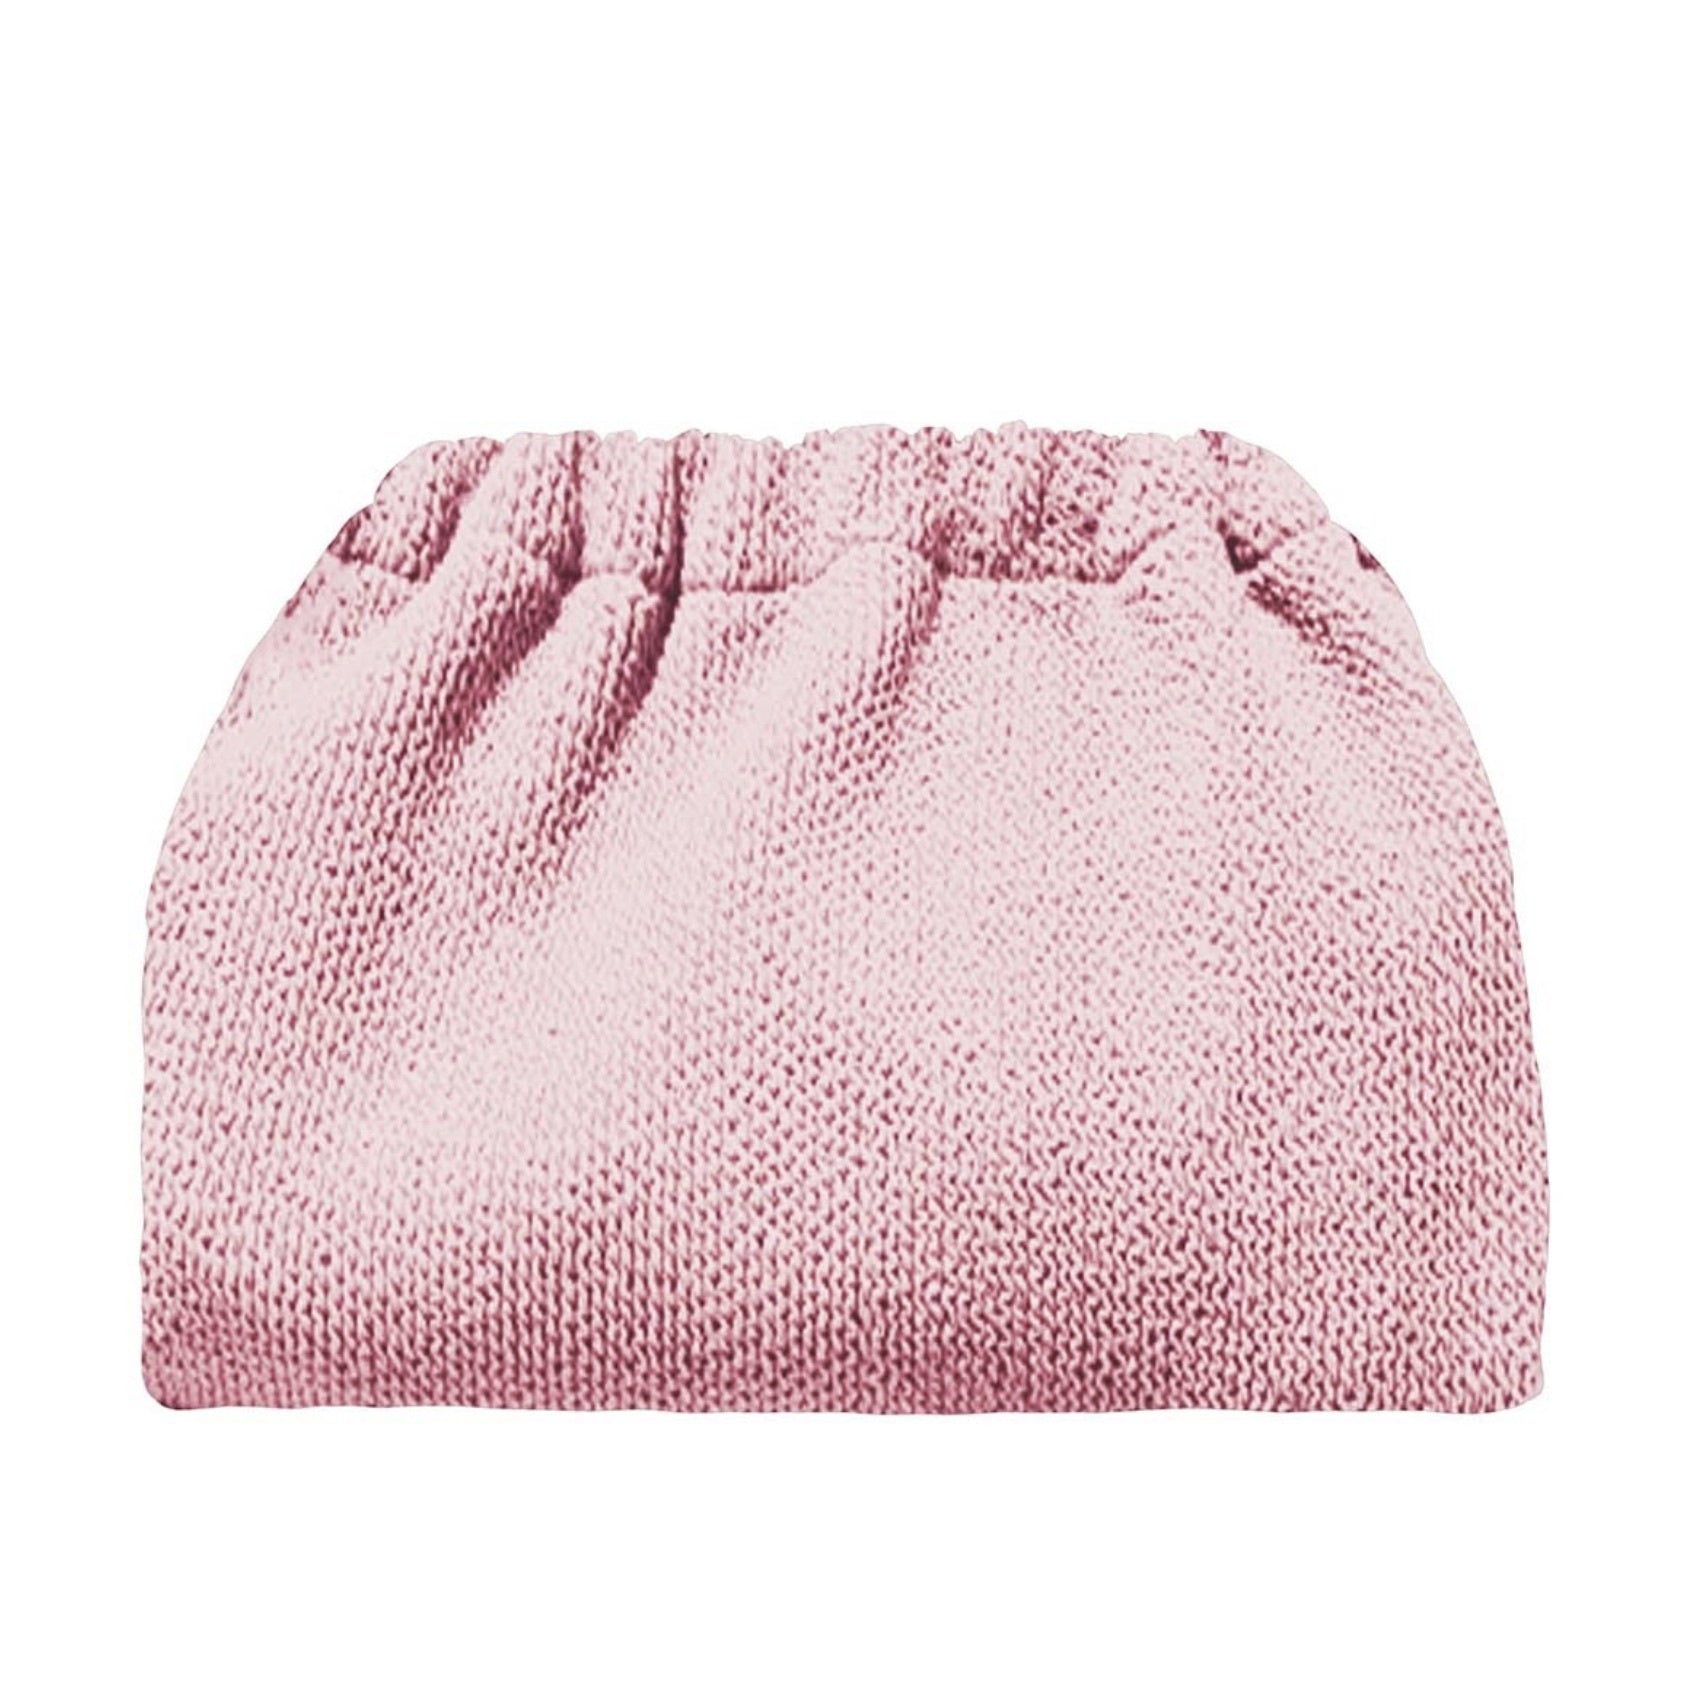 CRINKLE CLUTCH BAG - CANDY PINK